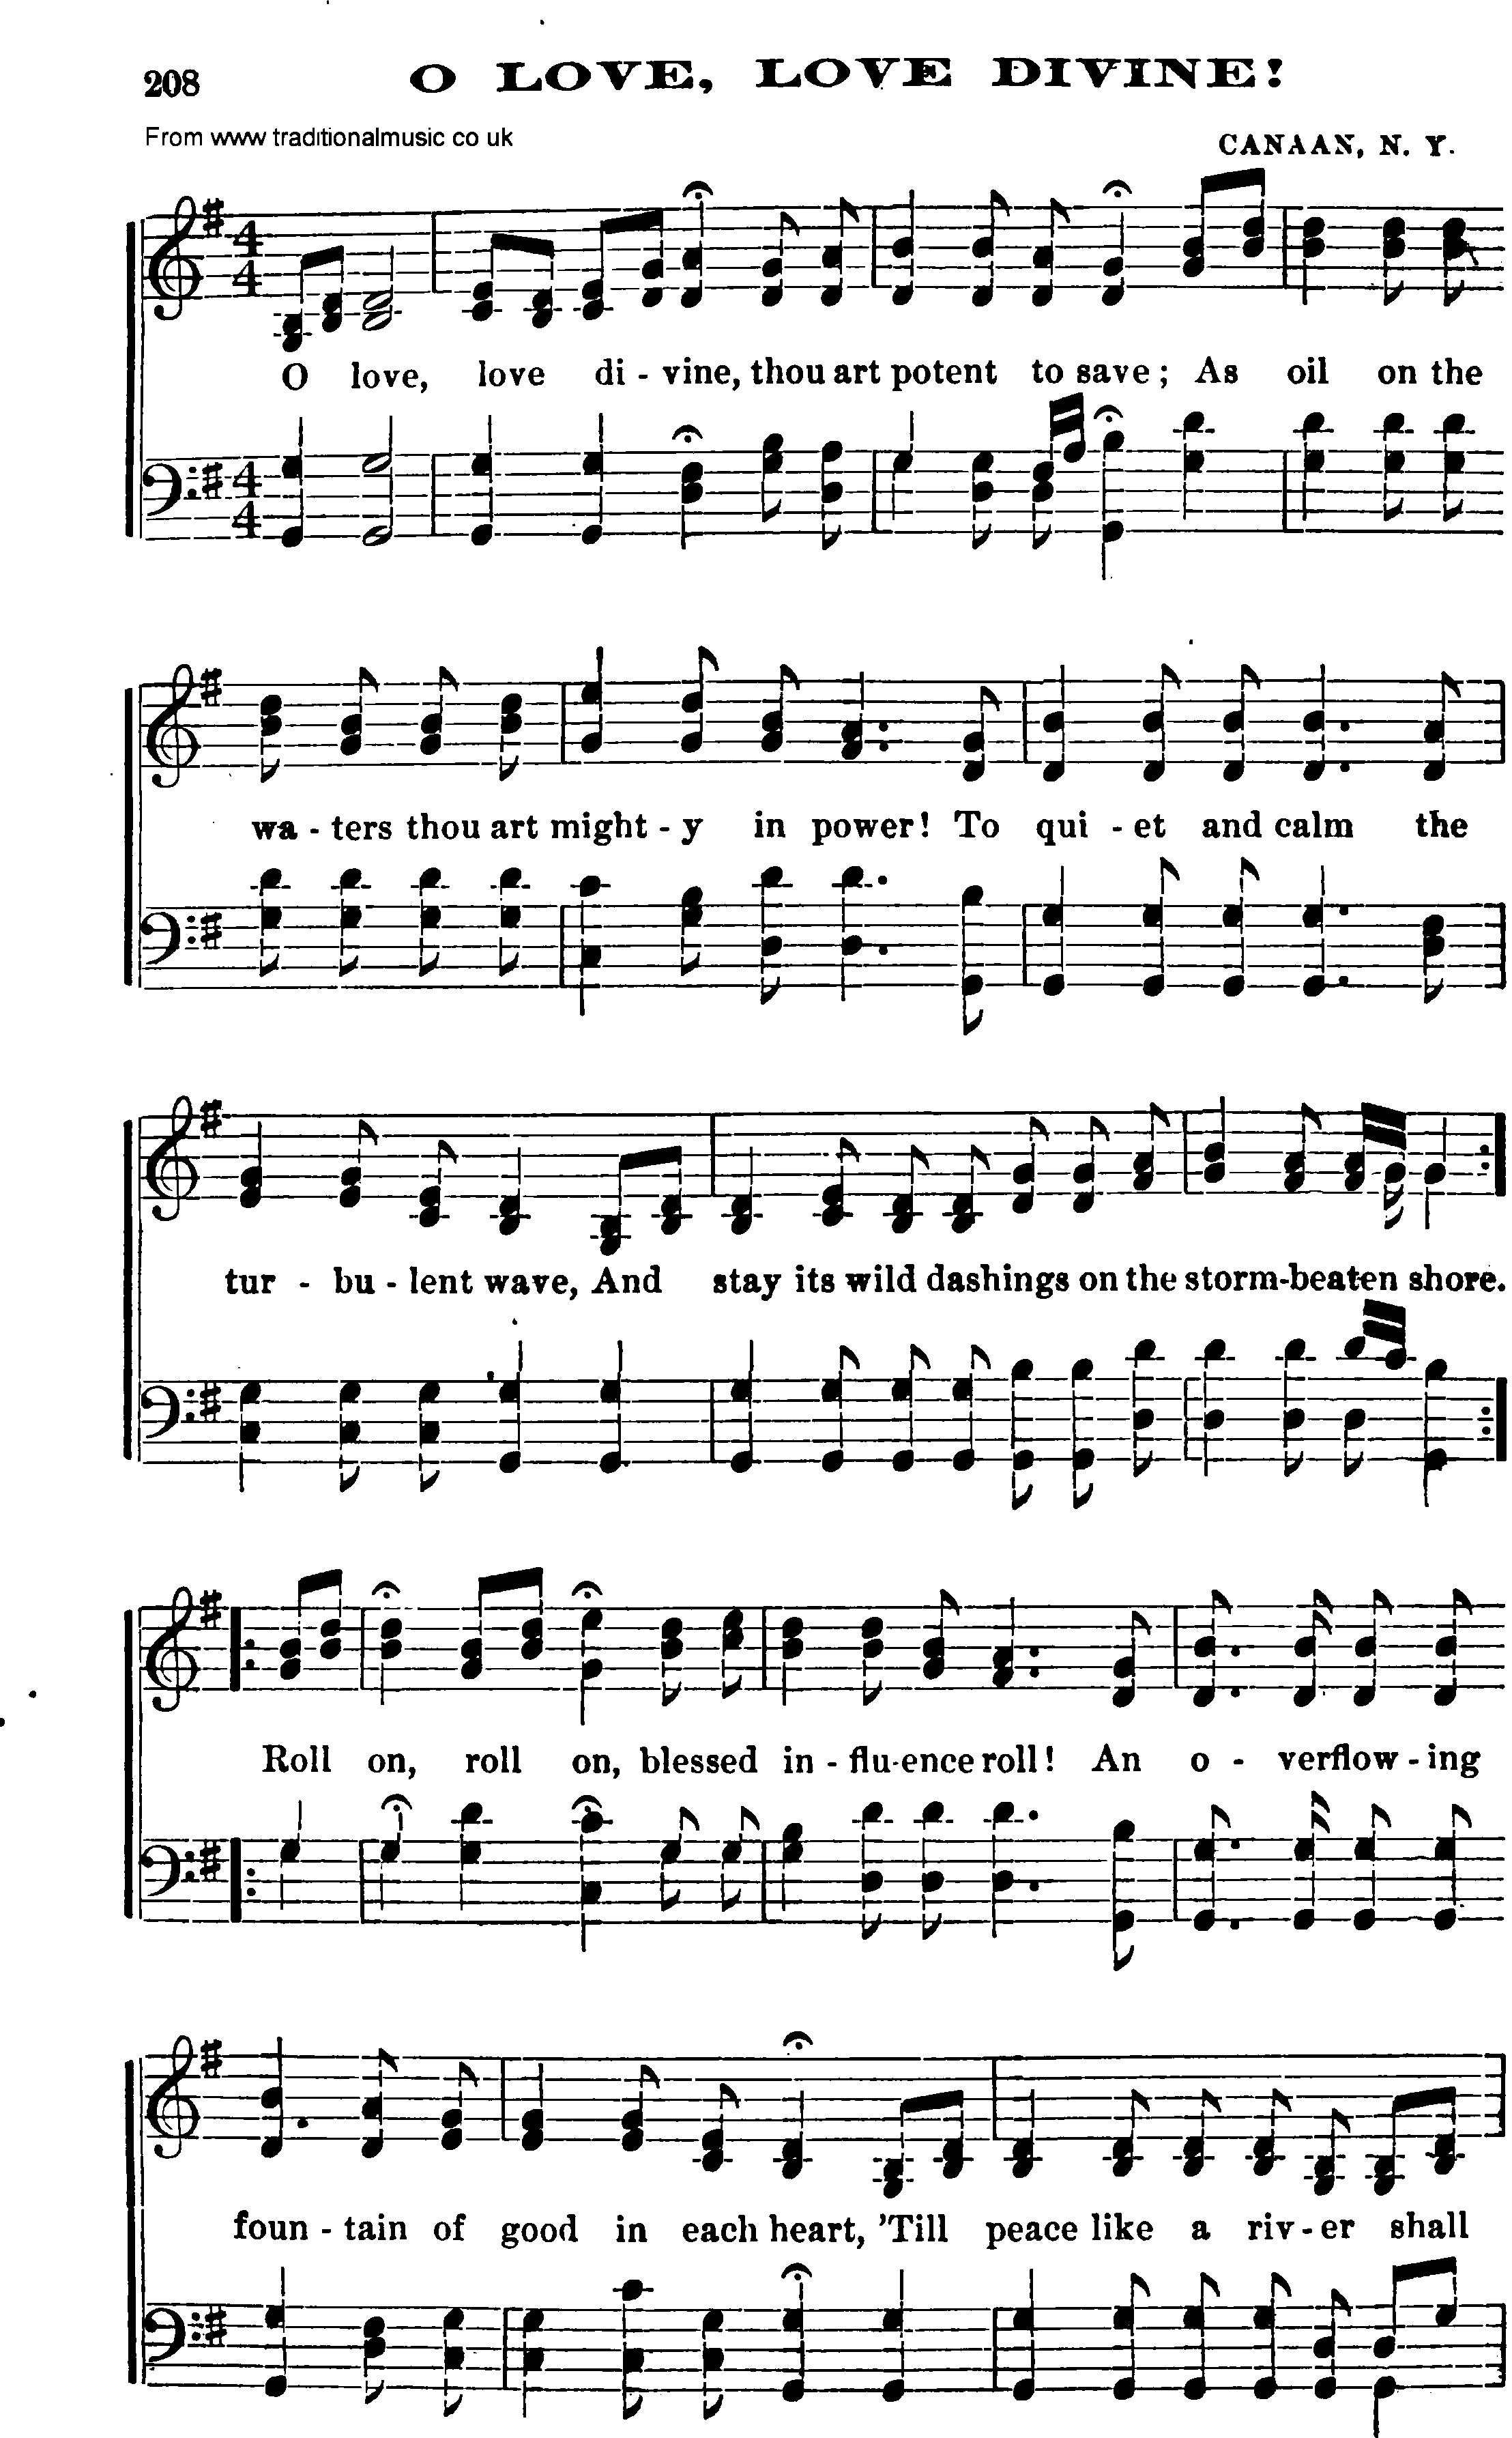 Shaker Music collection, Hymn: O Love, Love Divine, sheetmusic and PDF